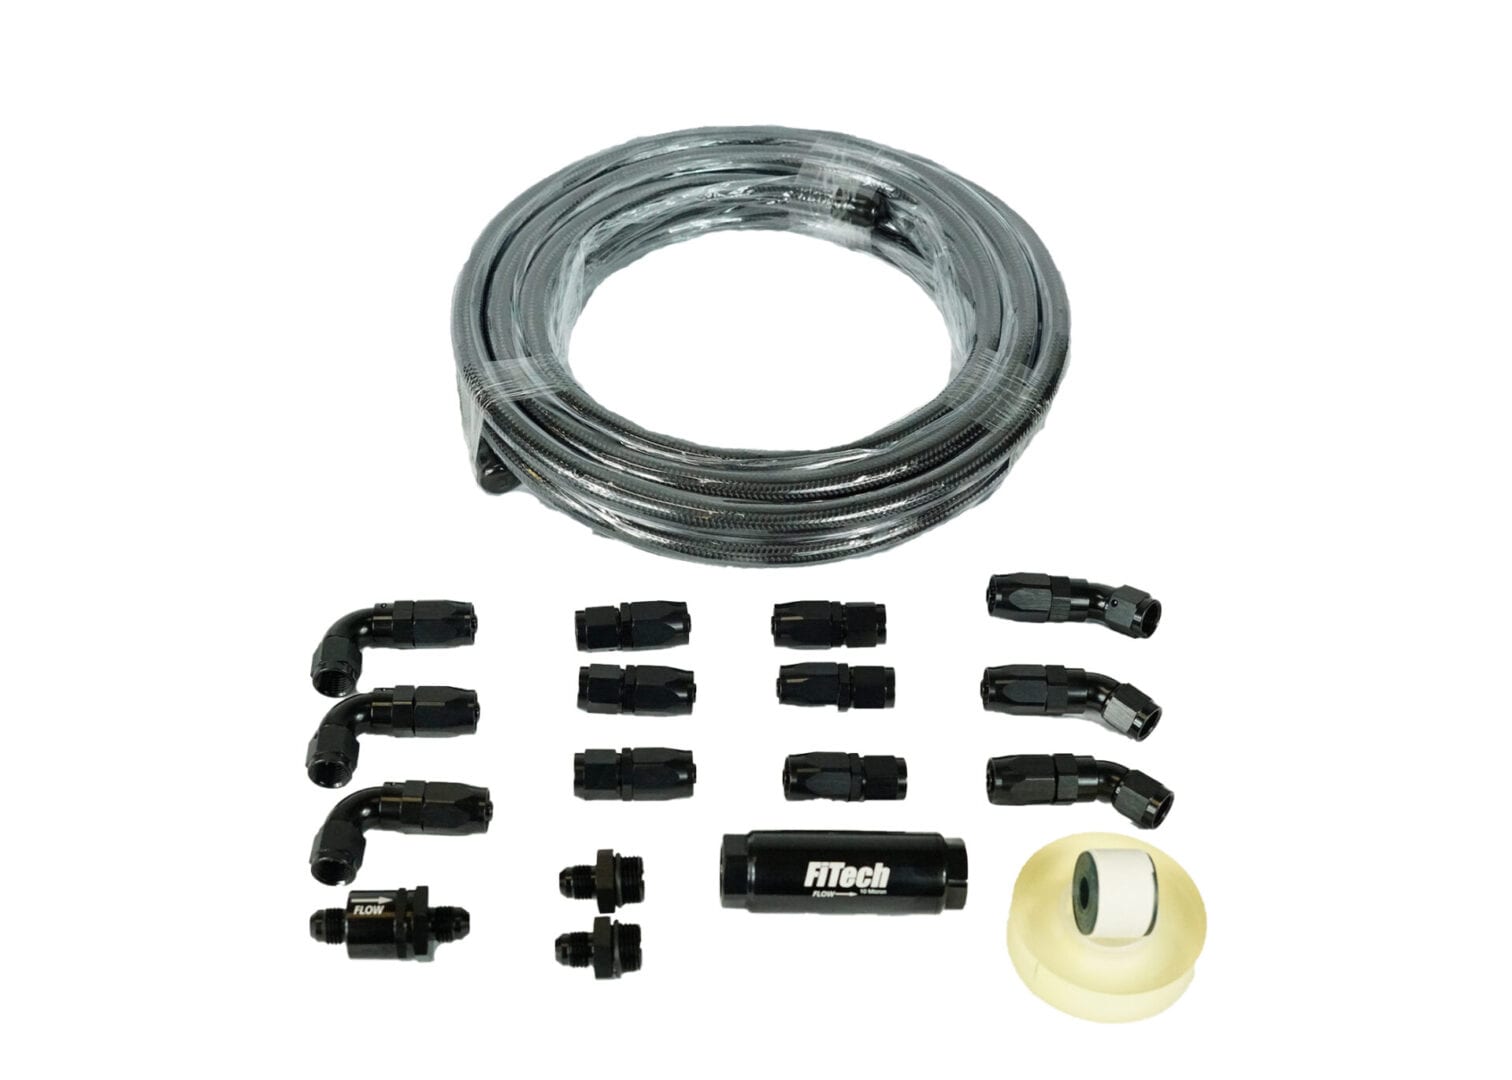 FiTech 51002 Black stainless Steel hose Kit, 20ft with 10 Micron filter and Check Valve